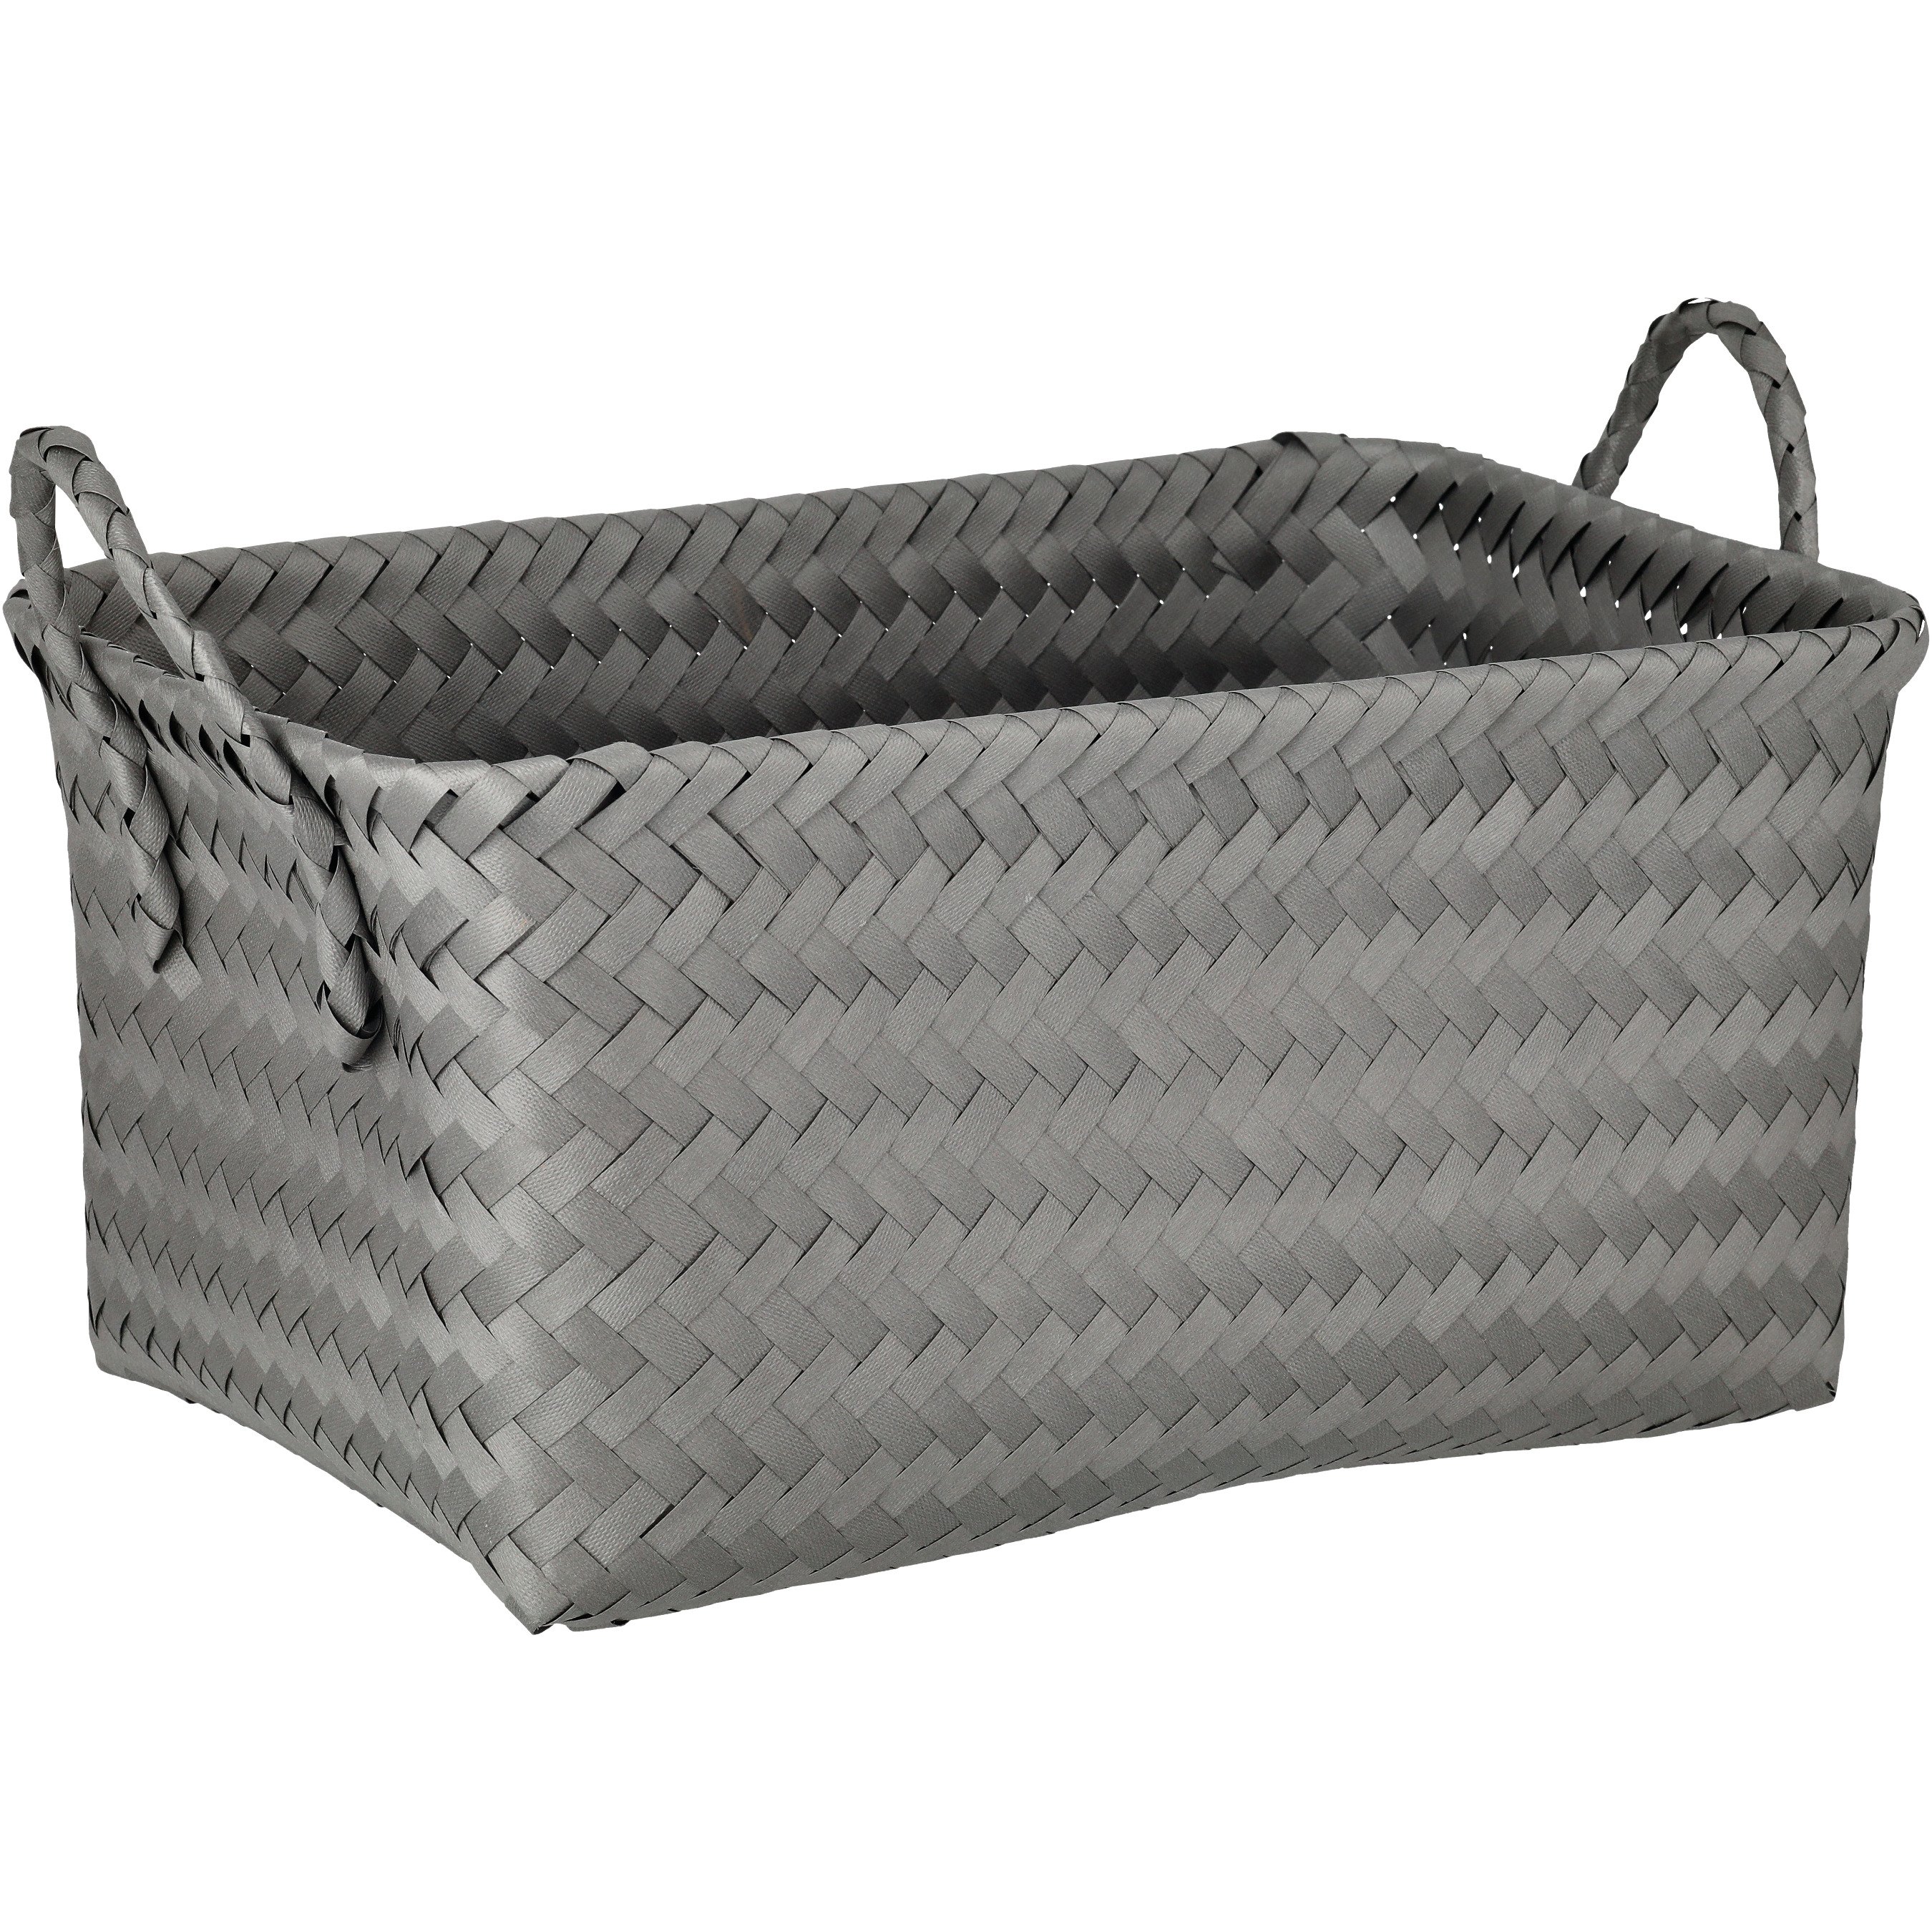 All About U Small Basket With Dividers Mint - Shop Closet & Cabinet  Organizers at H-E-B